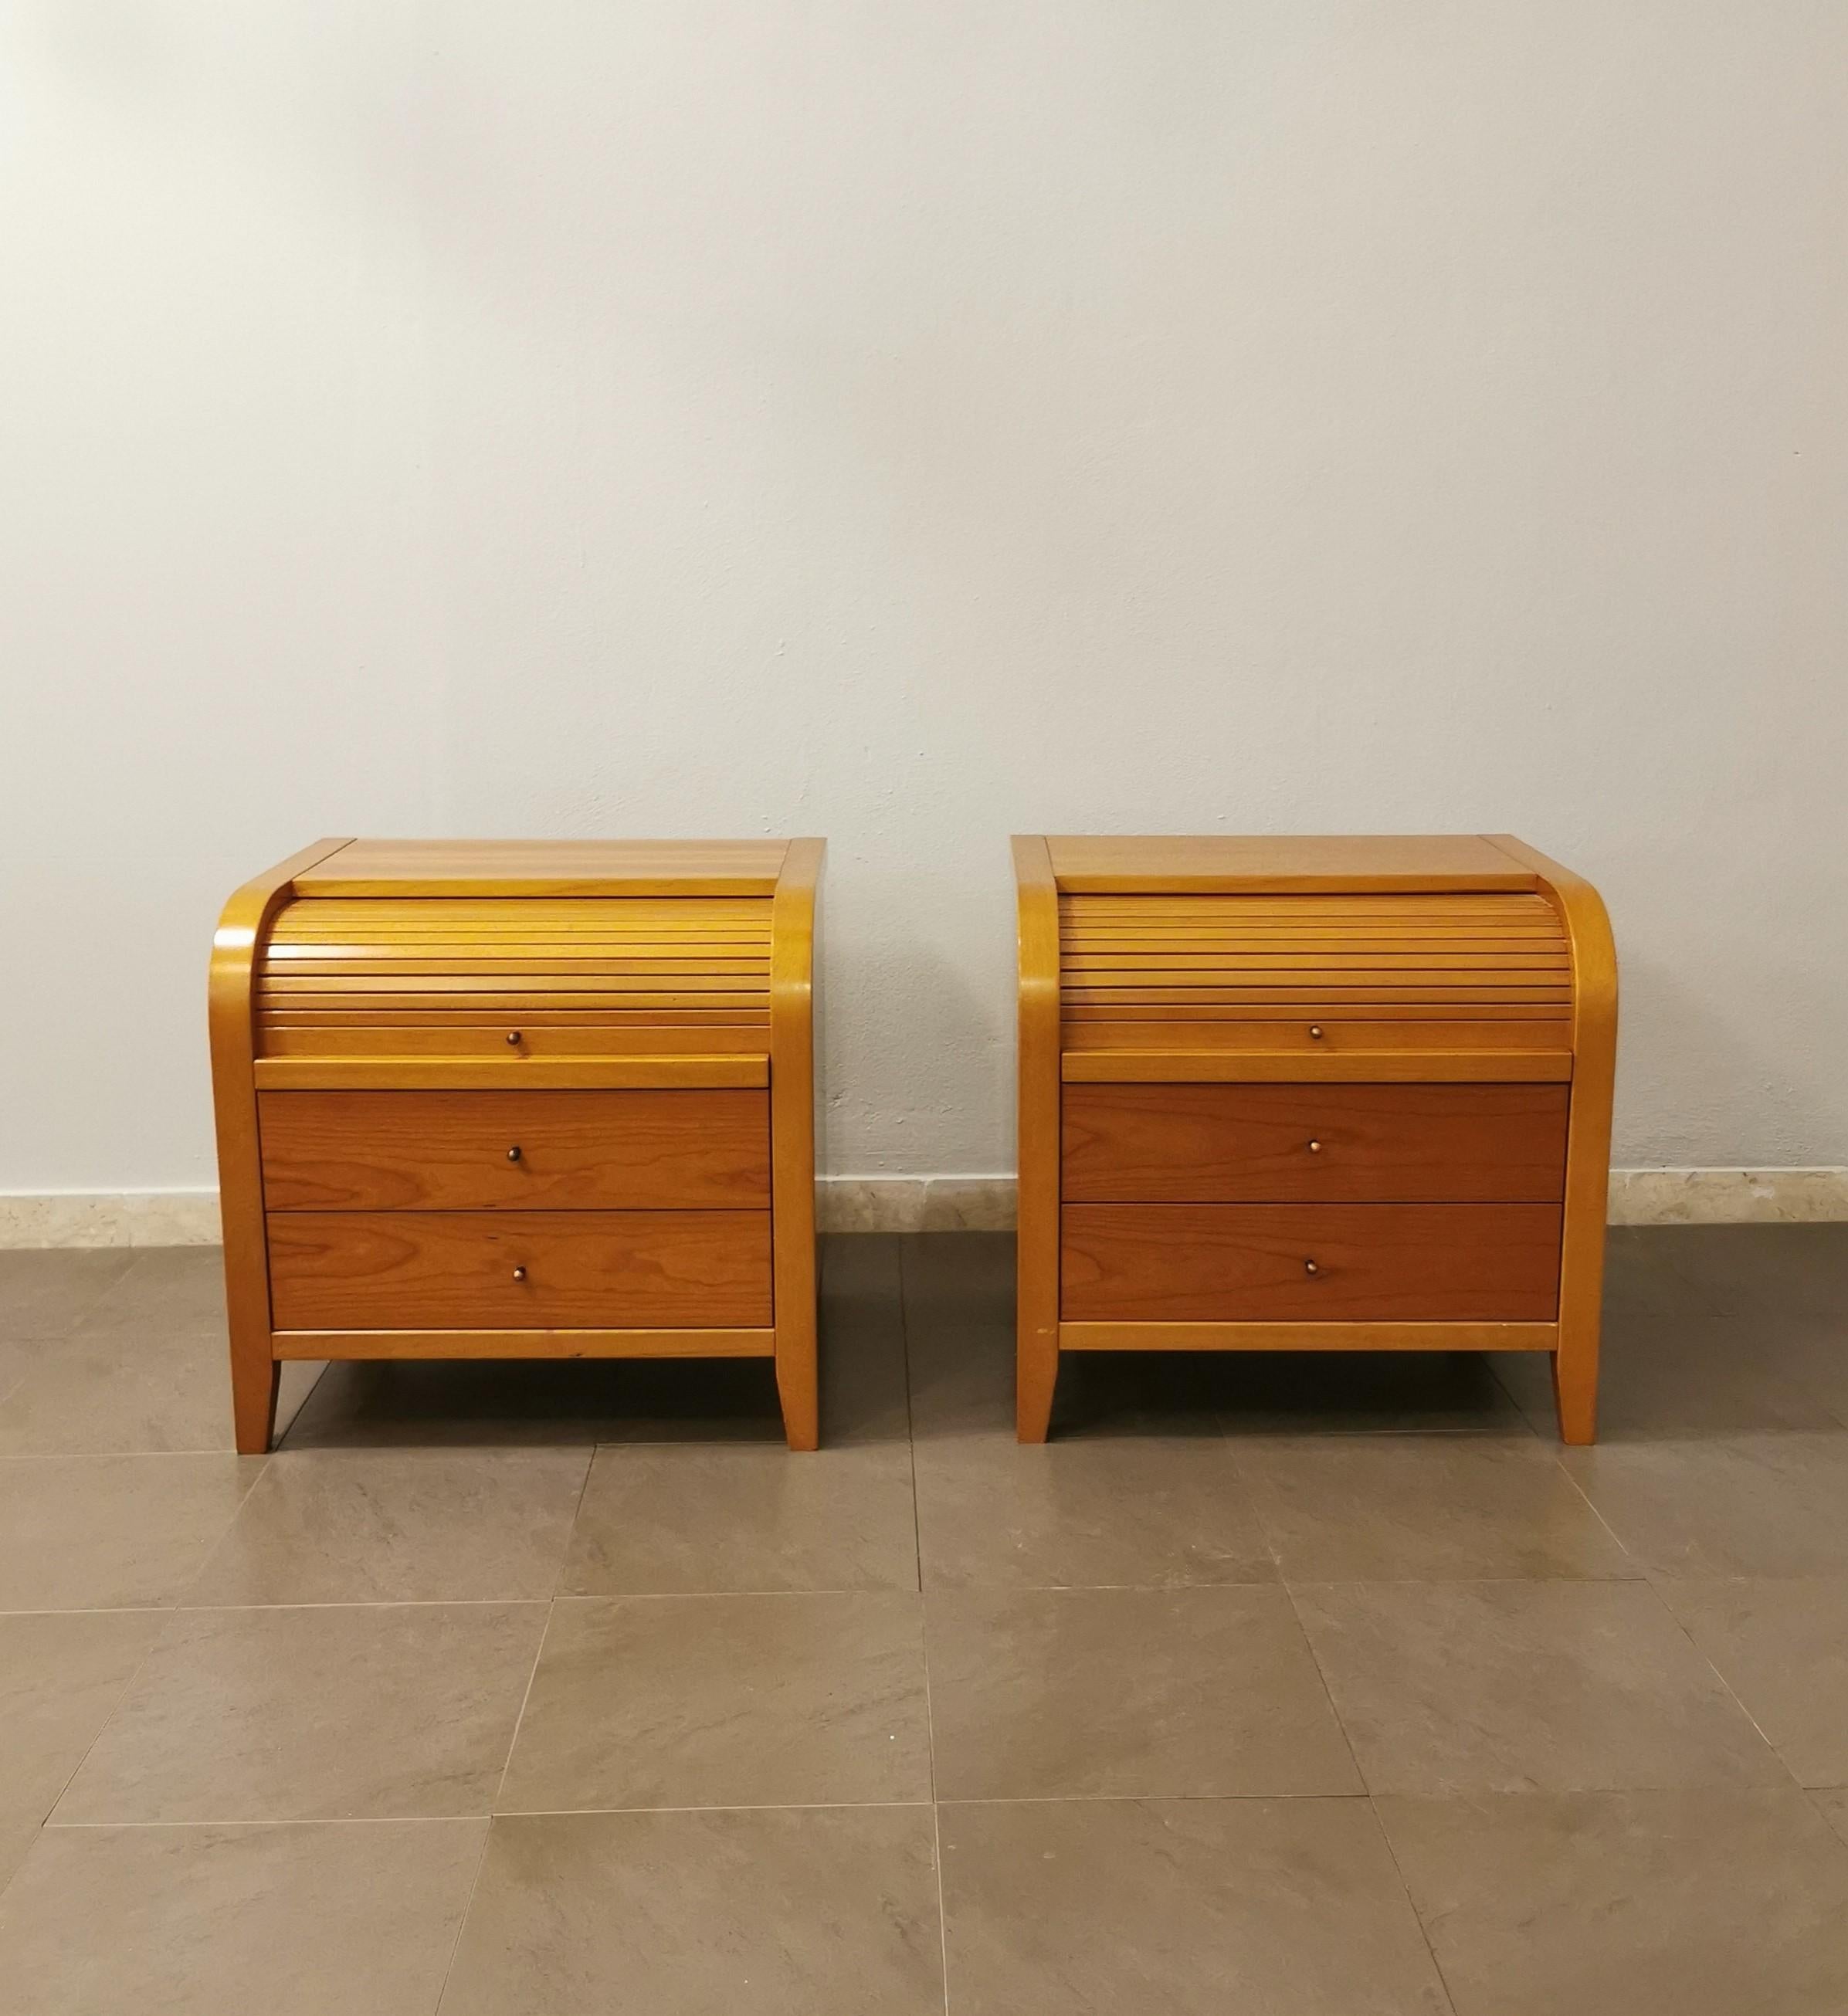 Particular set of 2 bedside tables designed by the Italian design company Calligaris during the 90s. The two furnishing accessories are in cherry wood with brass / aluminum knobs with bronzed effect. Each single bedside table has 1 shutter